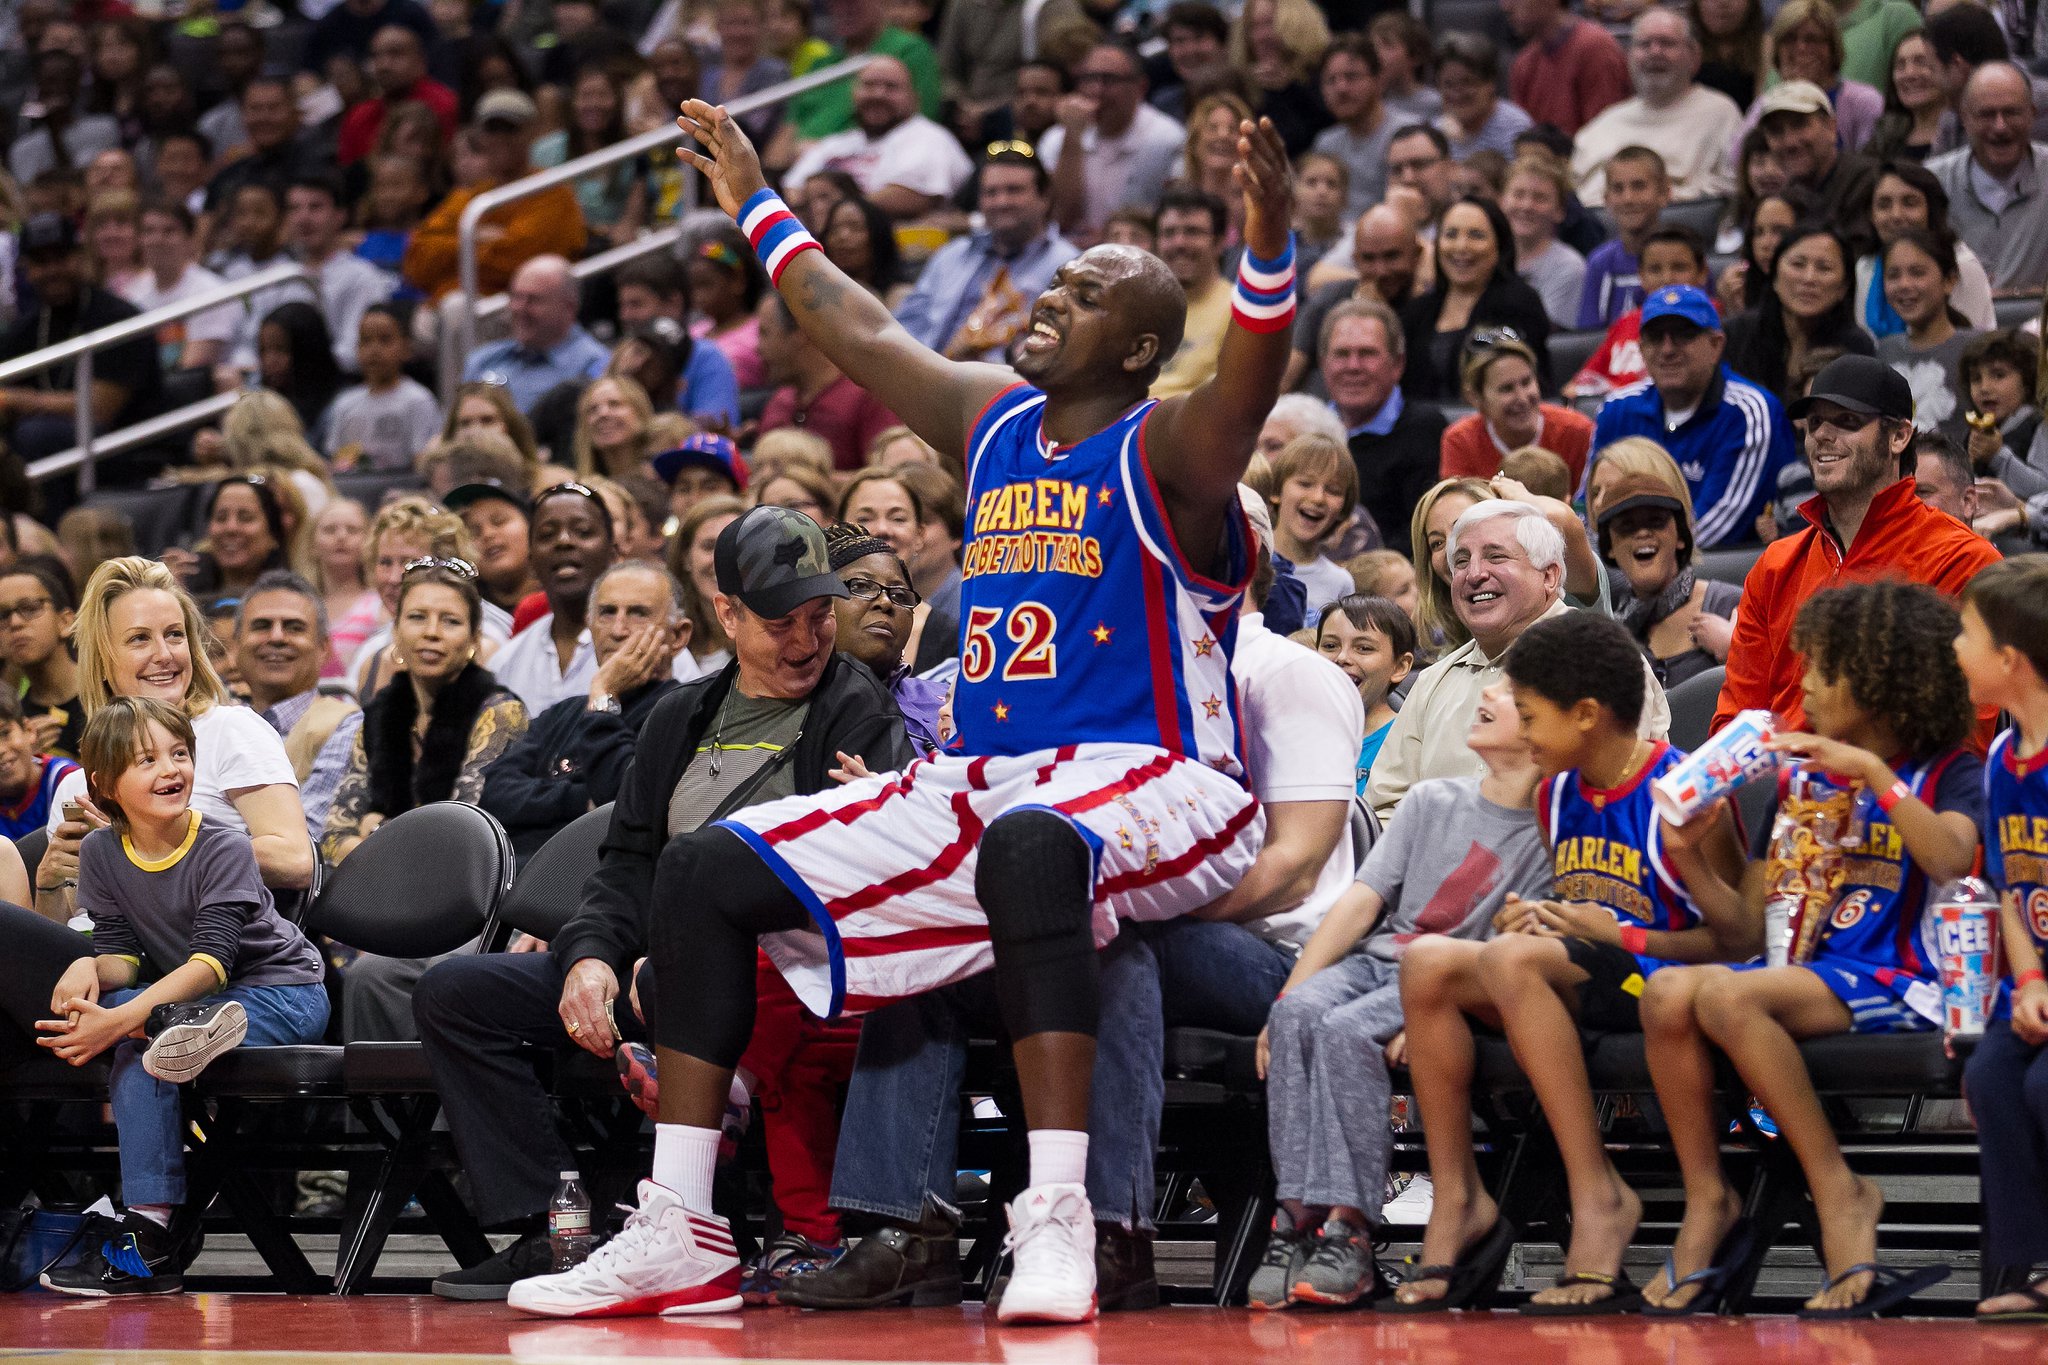 Harlem Globetrotters on X: Geese and Meadowlark were both